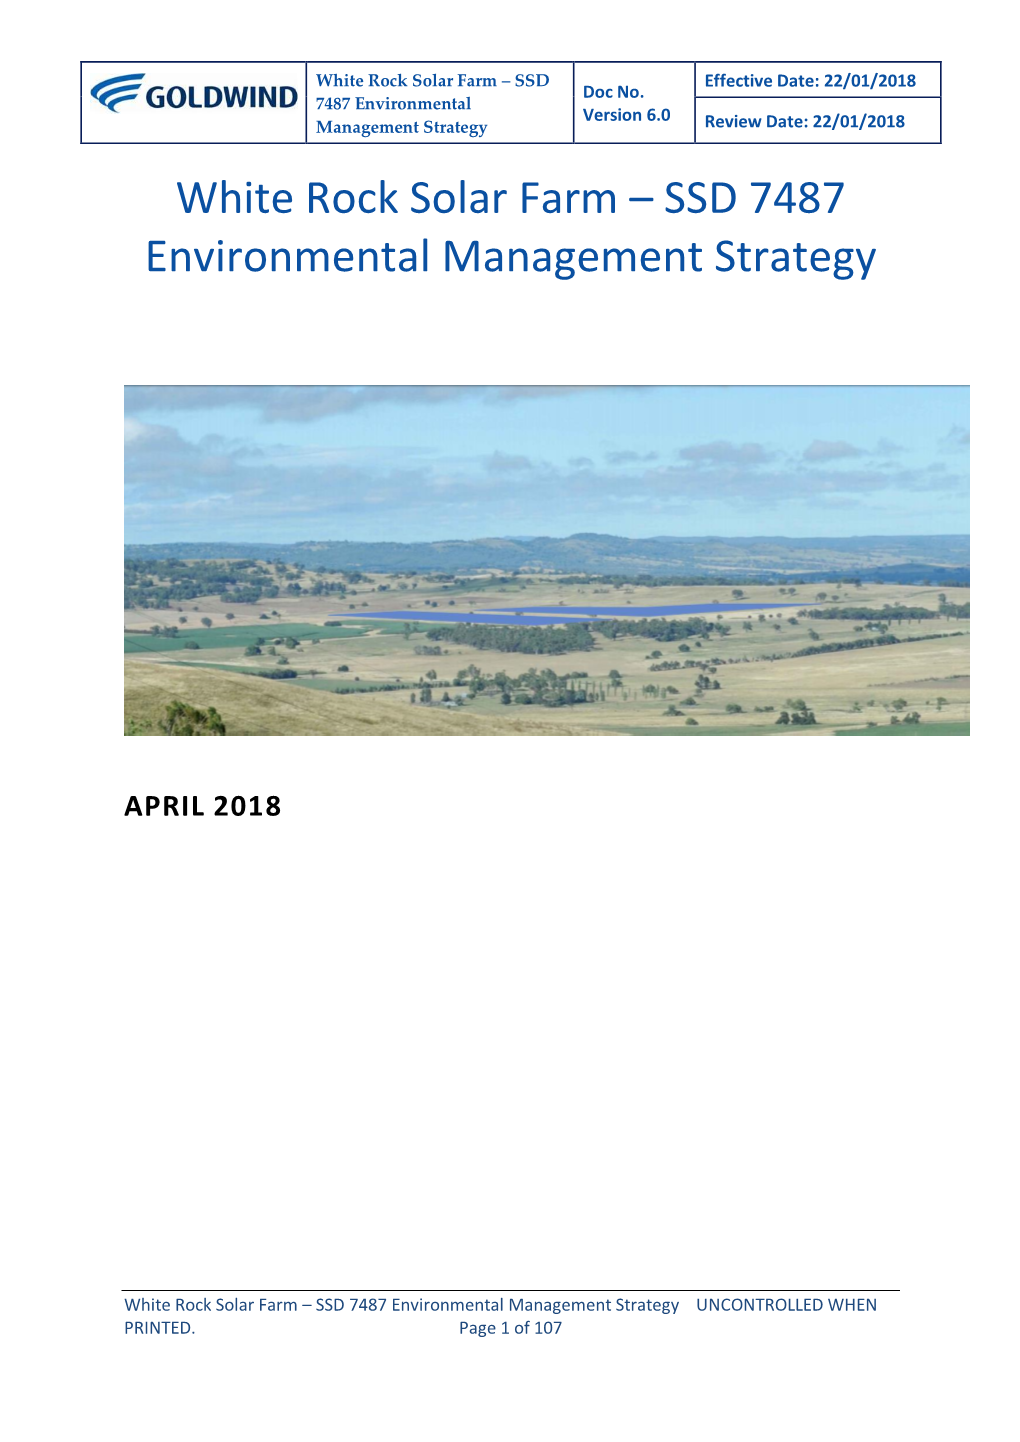 SSD 7487 Environmental Management Strategy